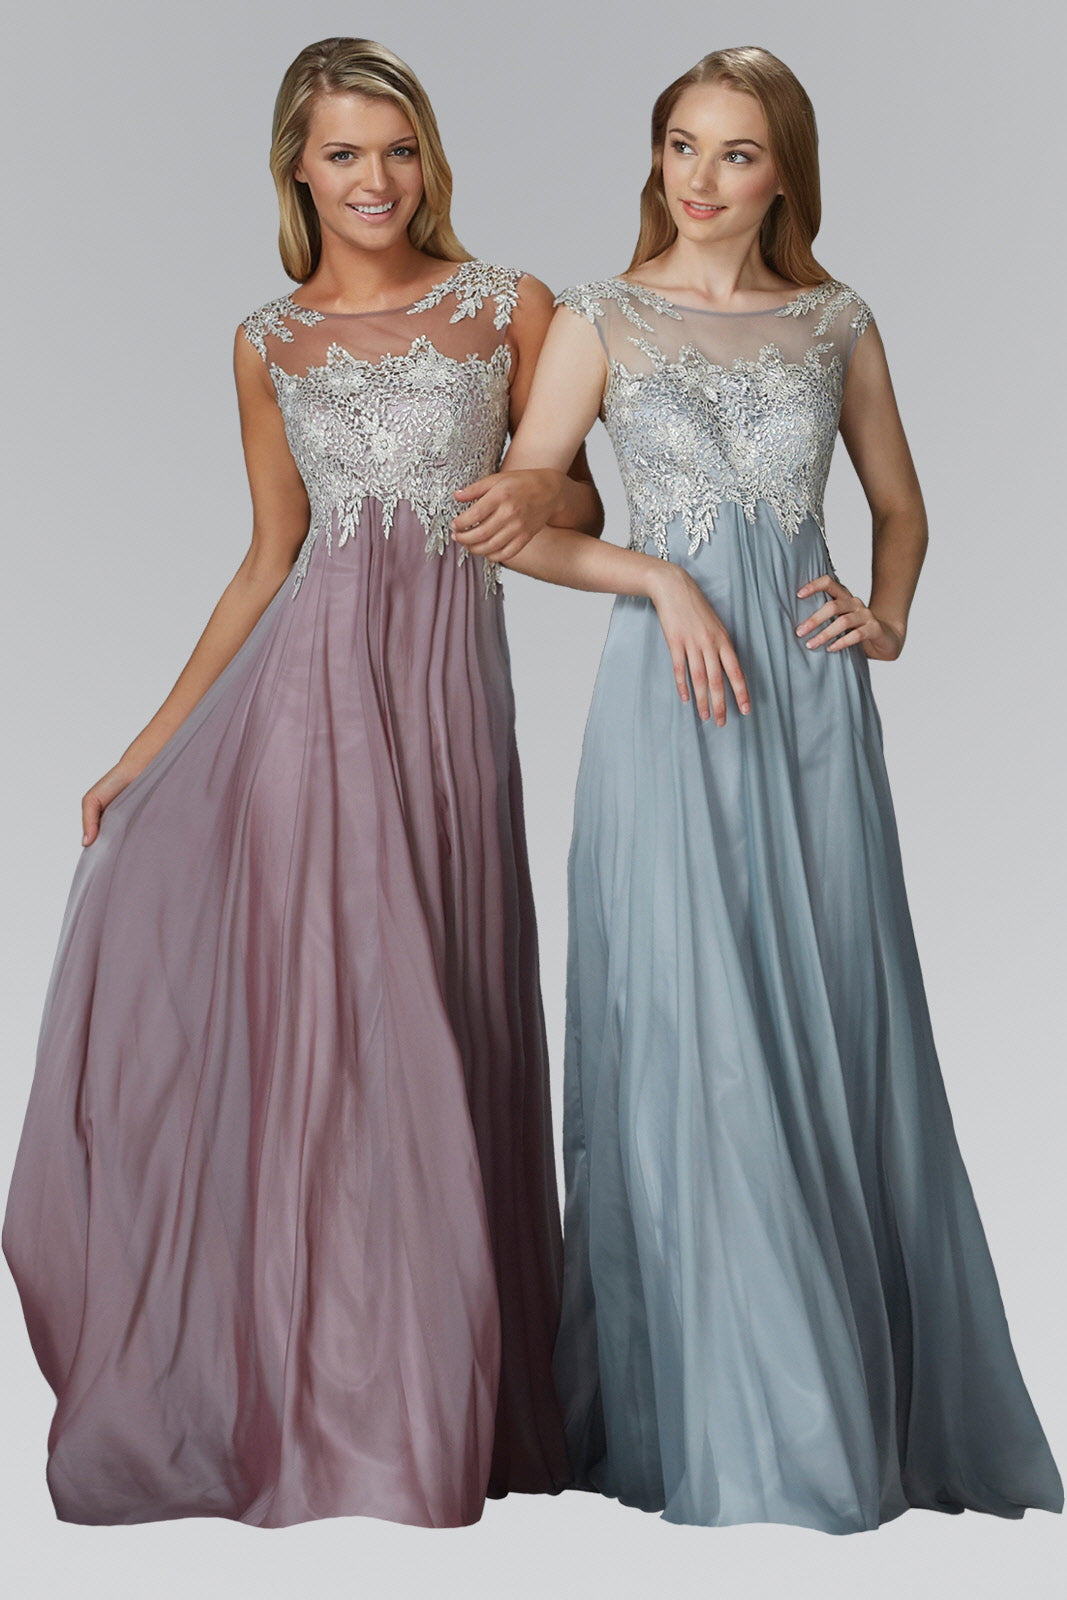 Chiffon Long Dress with Lace Embellished Bodice and Sheer Neckline GLGL2098 Elsy Style PROM